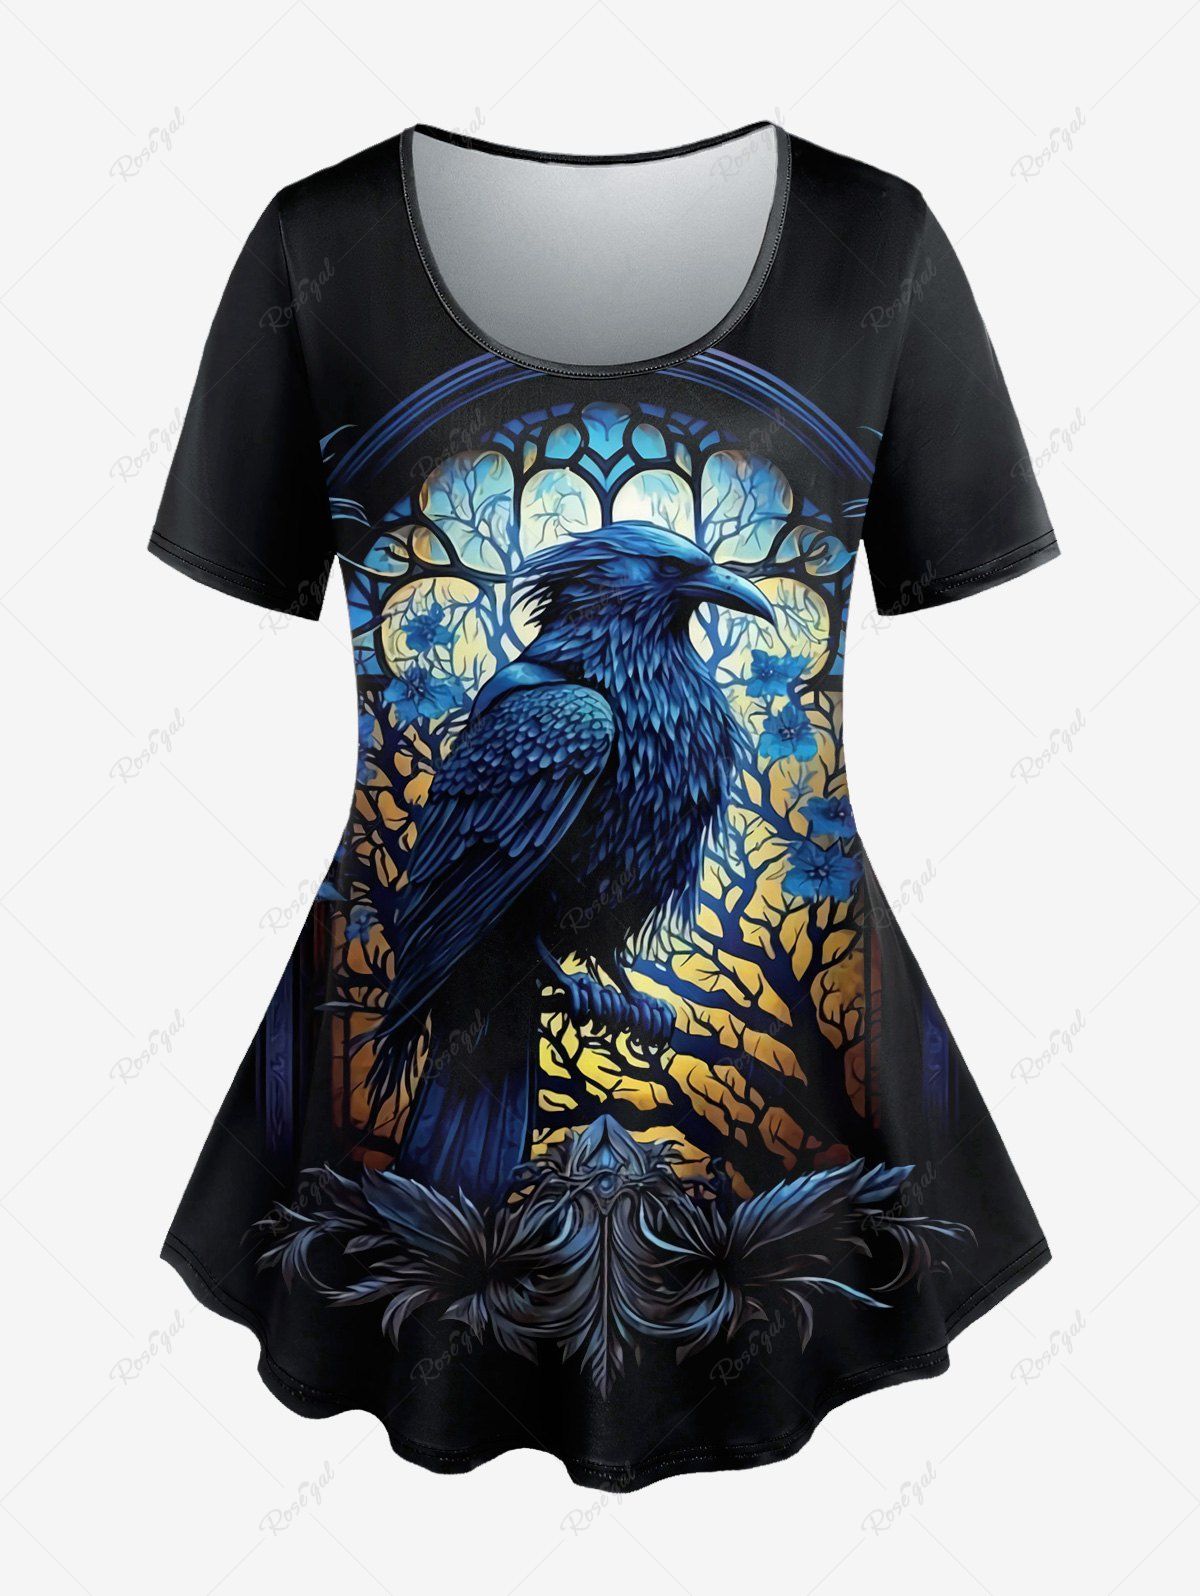 Hot Gothic Eagle Tree Feather Print Short Sleeves T-shirt  